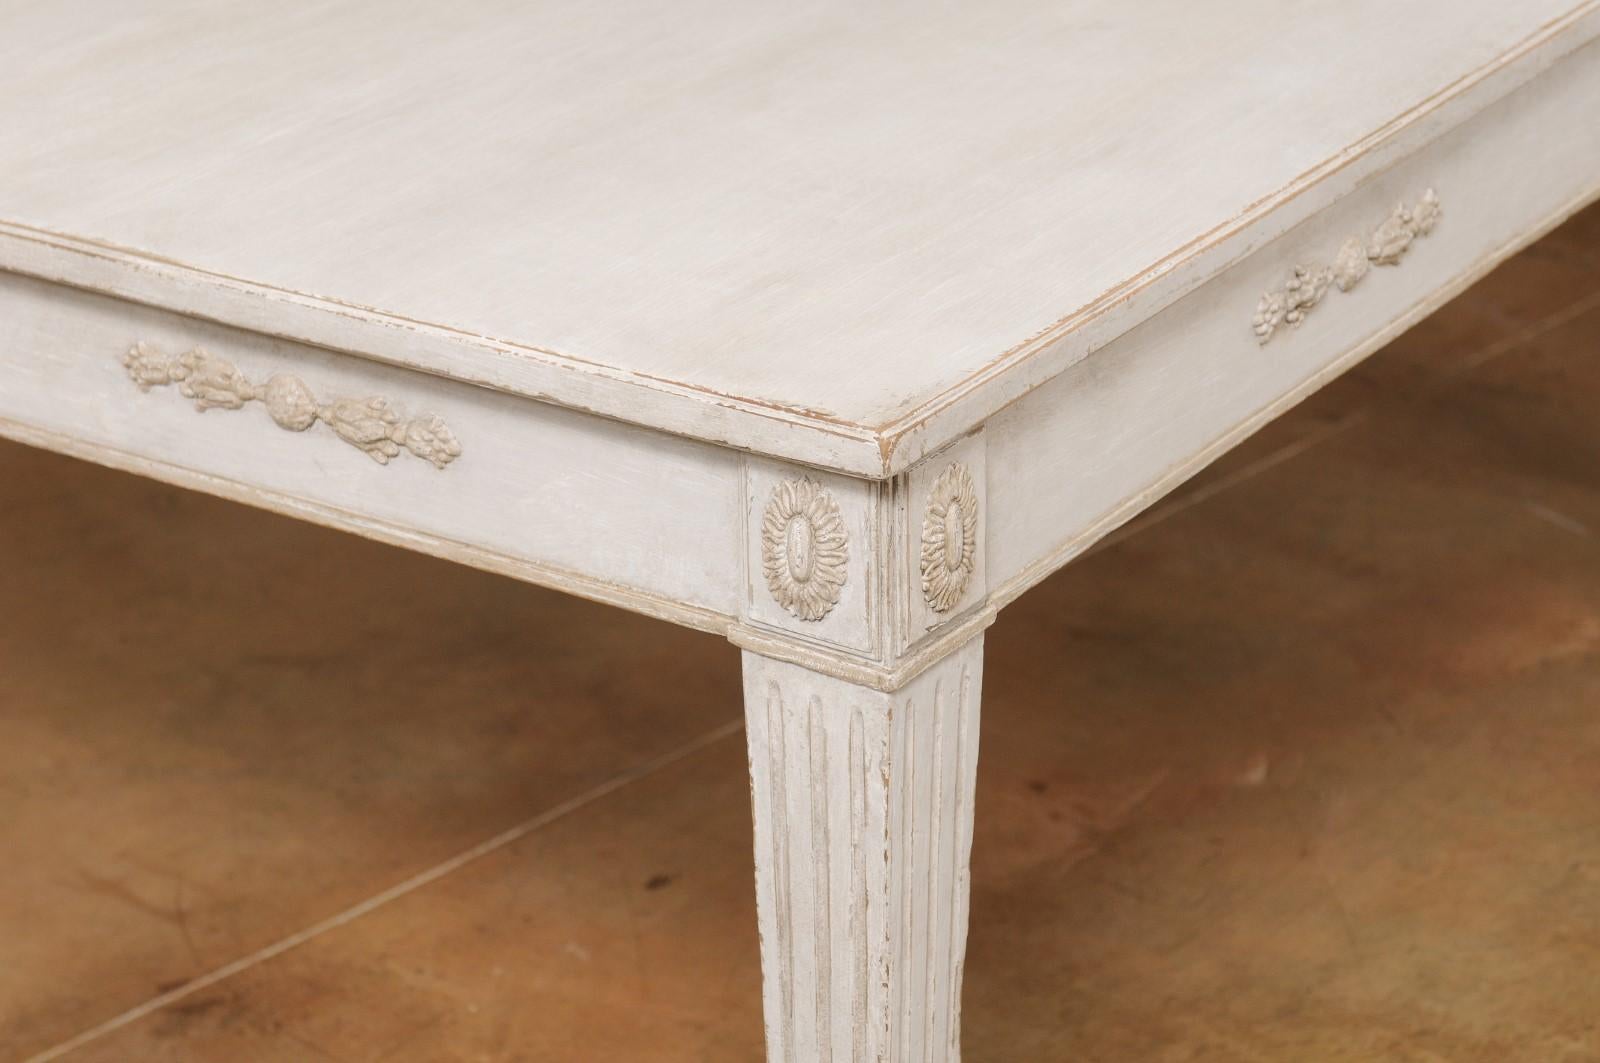 Wood Swedish 1900 Gustavian Style Dining Table with Carved Apron and Fluted Legs For Sale